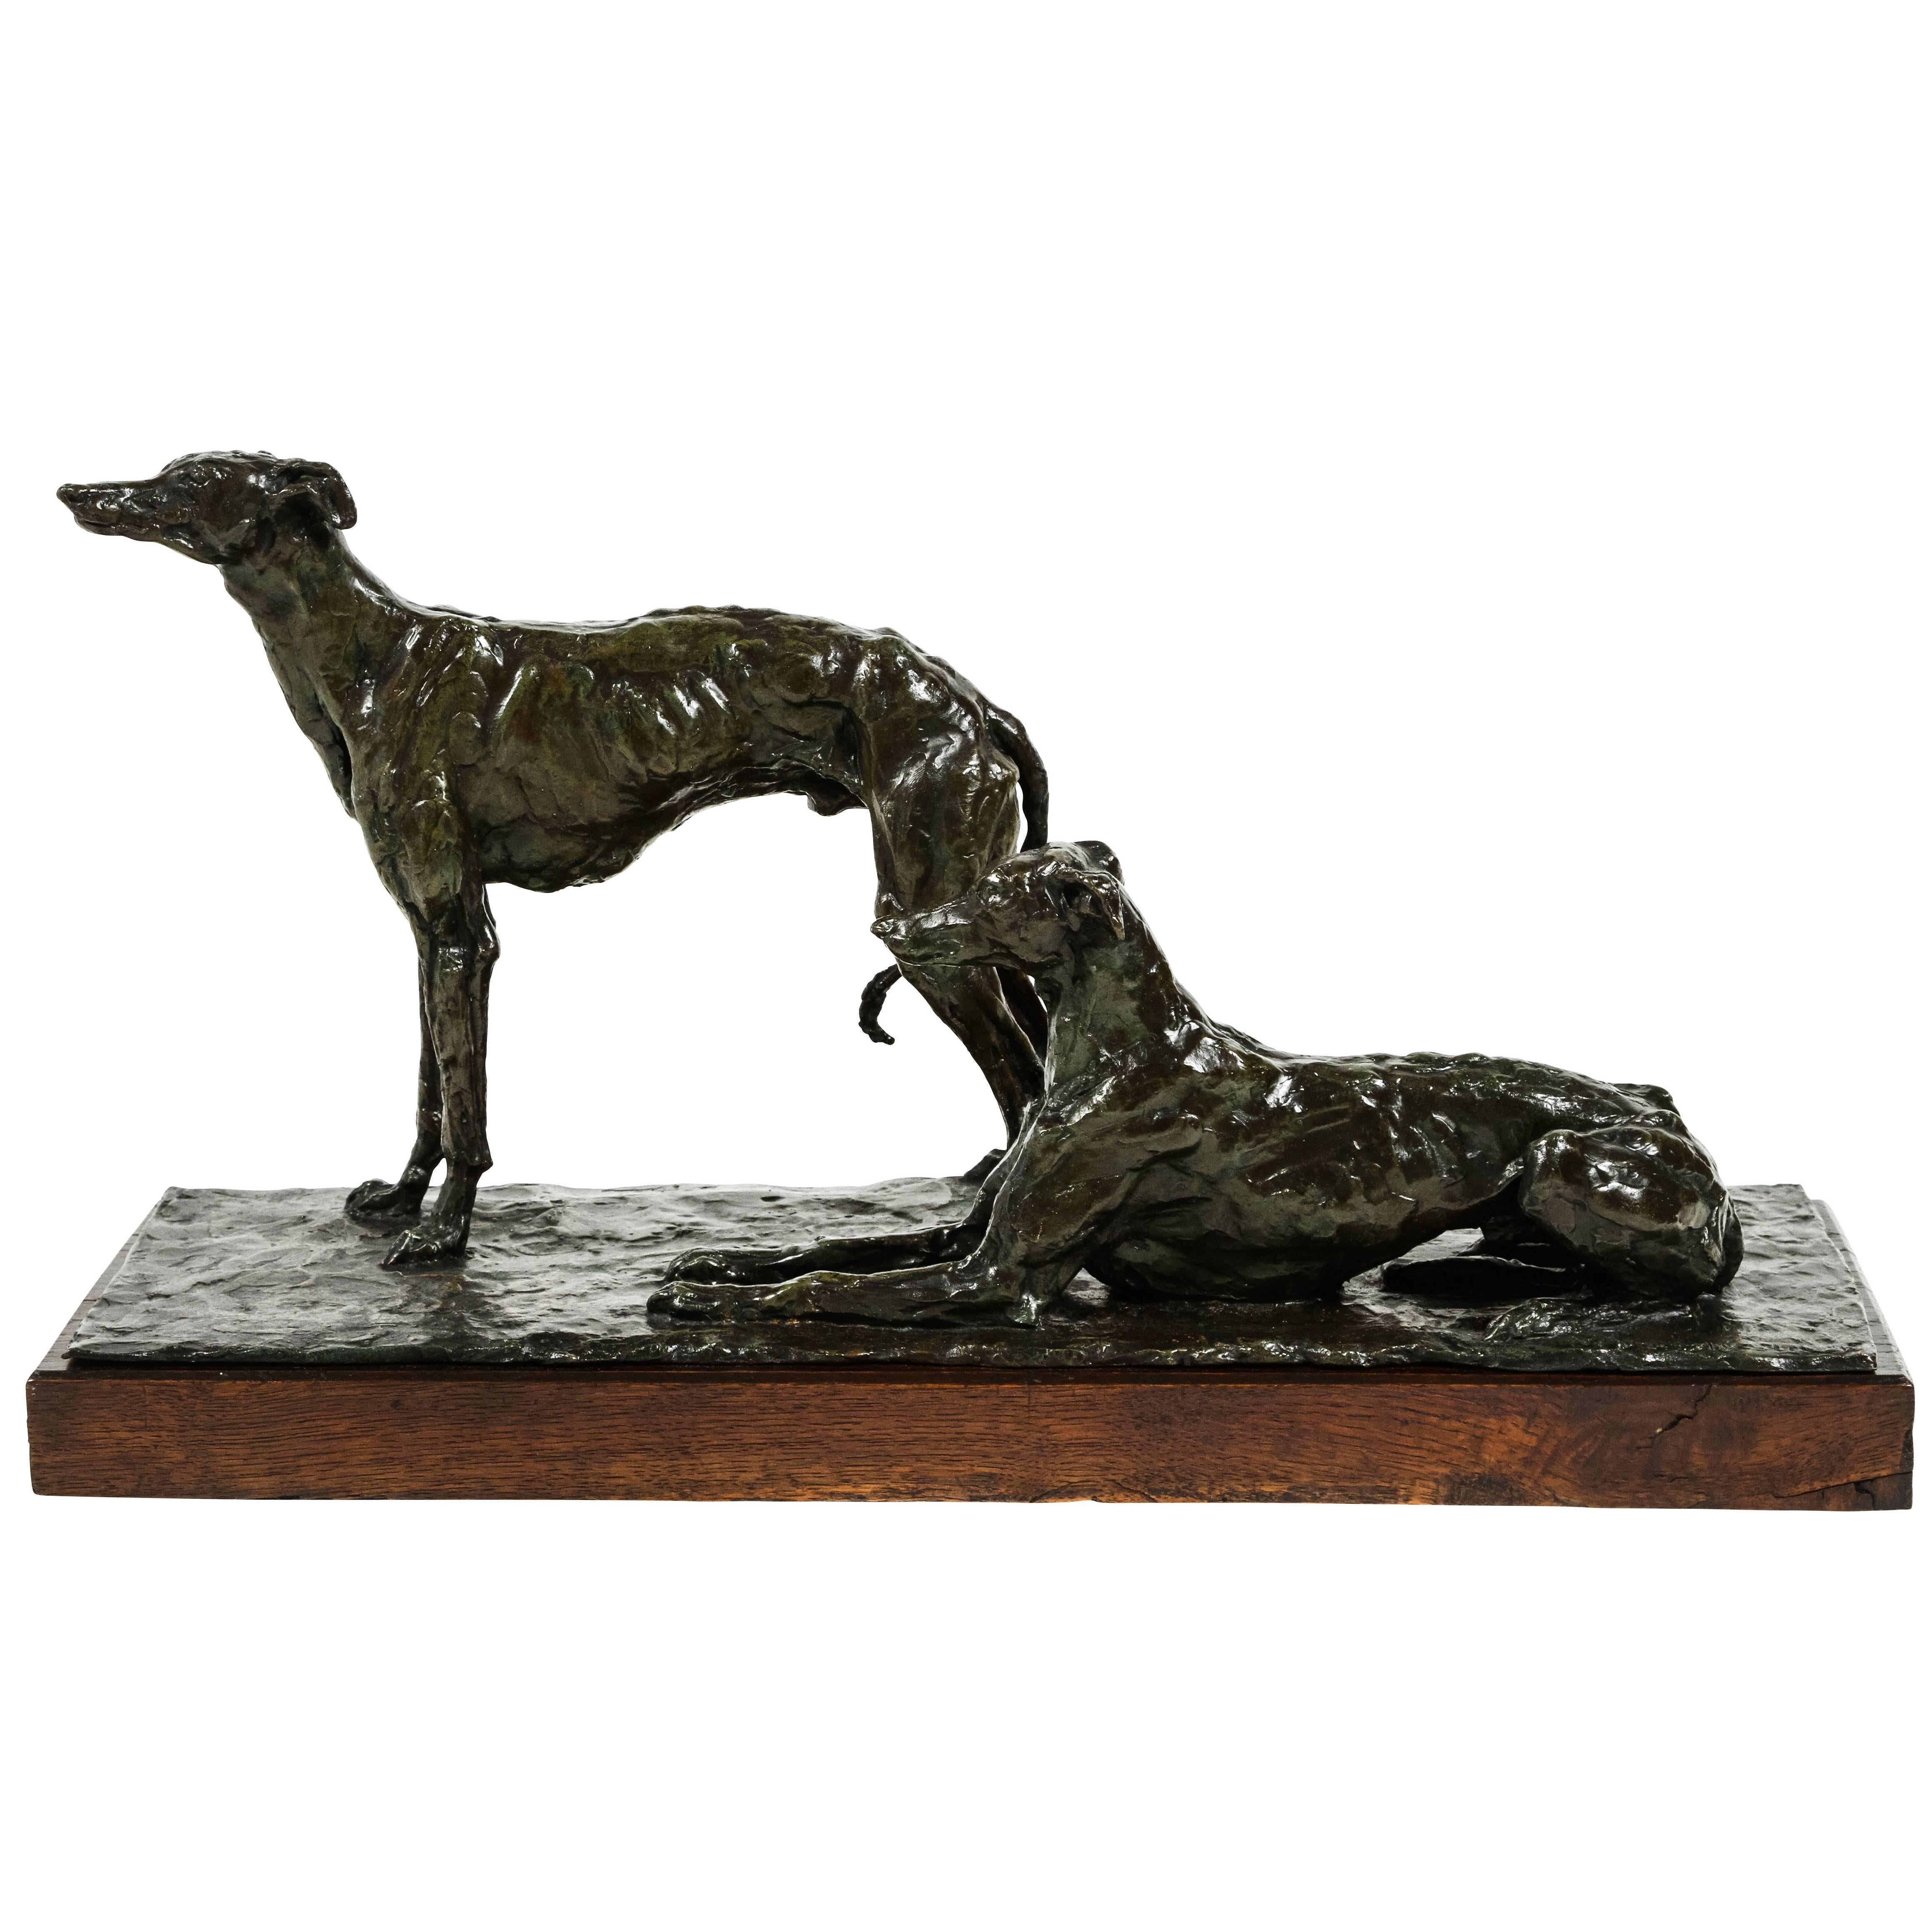 Unique French Cire Perdu Bronze of Greyhounds by Irénée Rochard